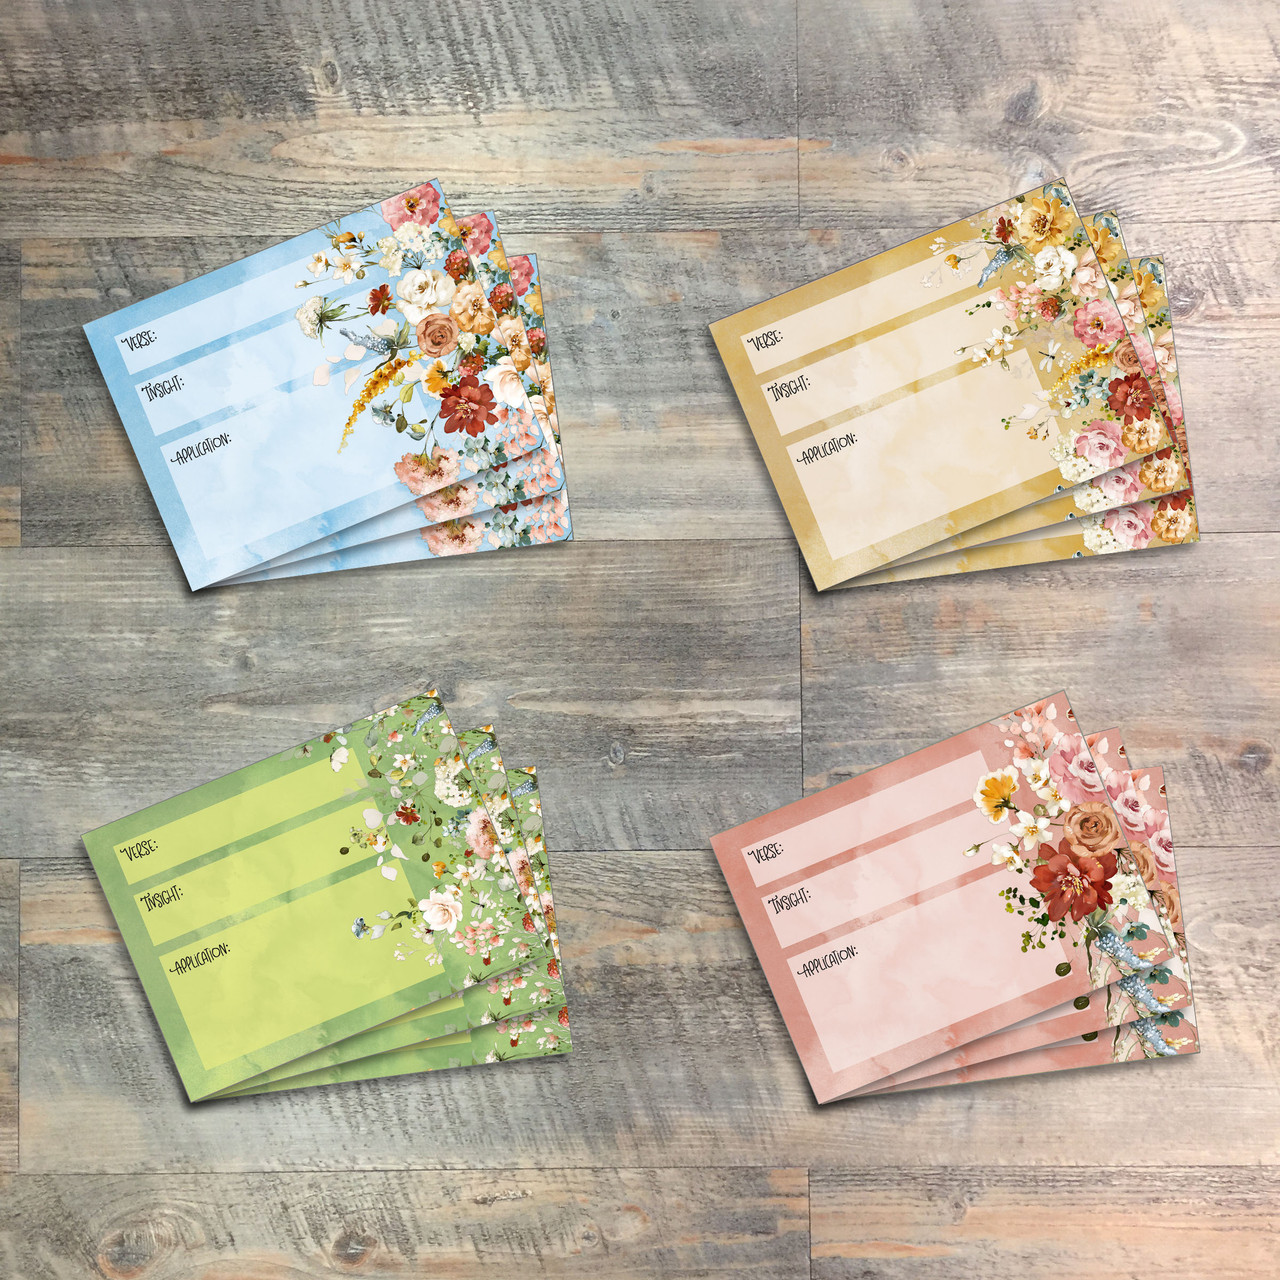 Pleasing in His Sight - Pleased Journaling Cards - 12 3x4 Journaling Cards  to Match "Pleasing in His Sight" Kit